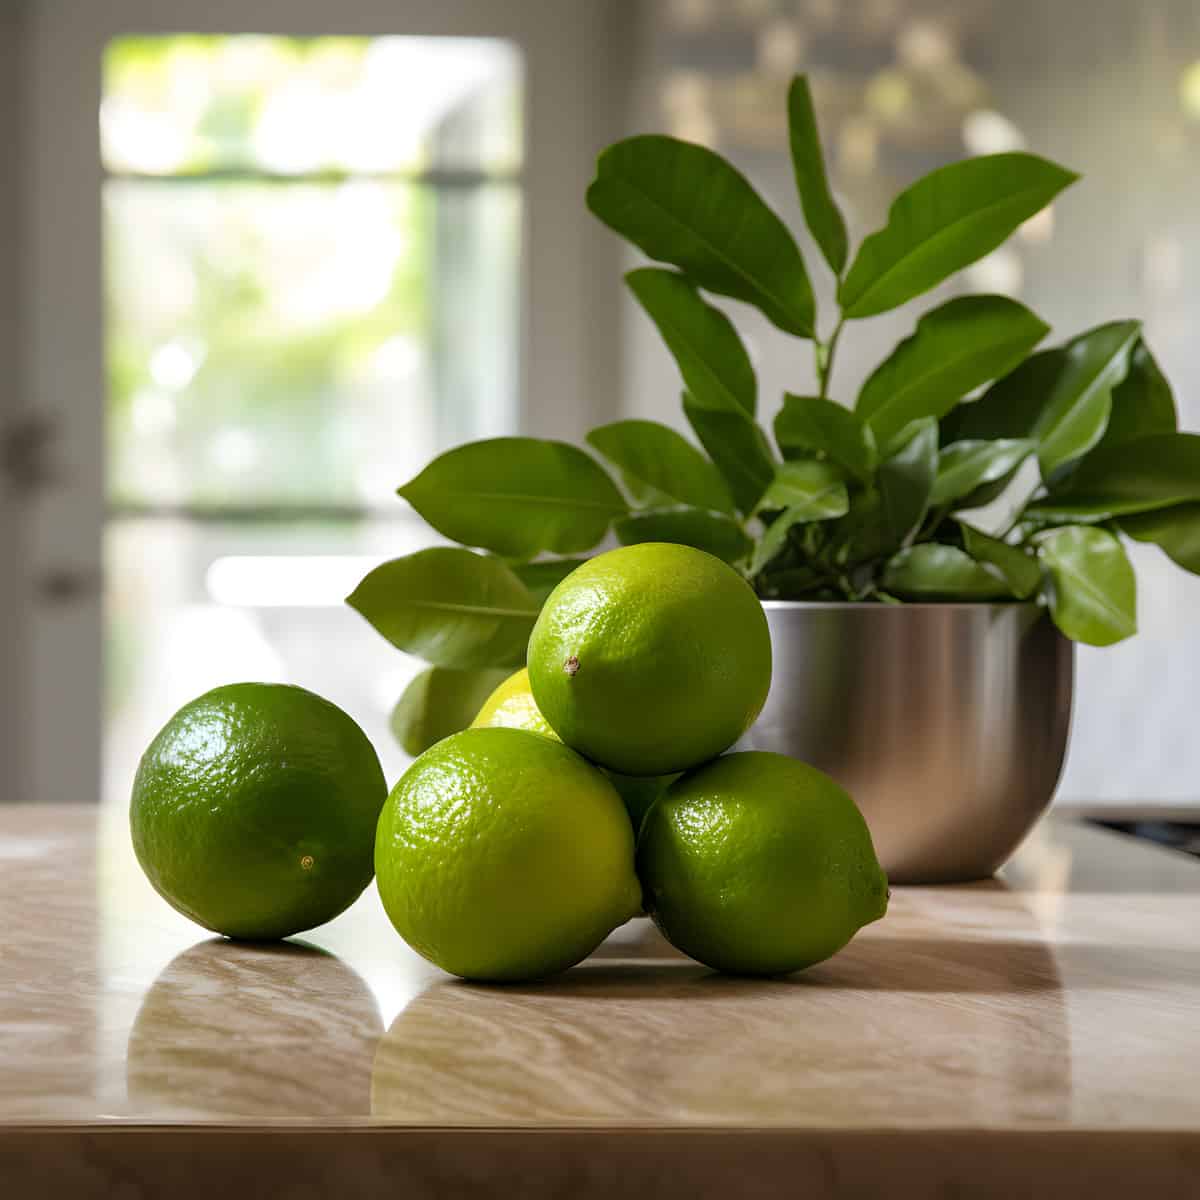 Spanish Lime on a kitchen counter